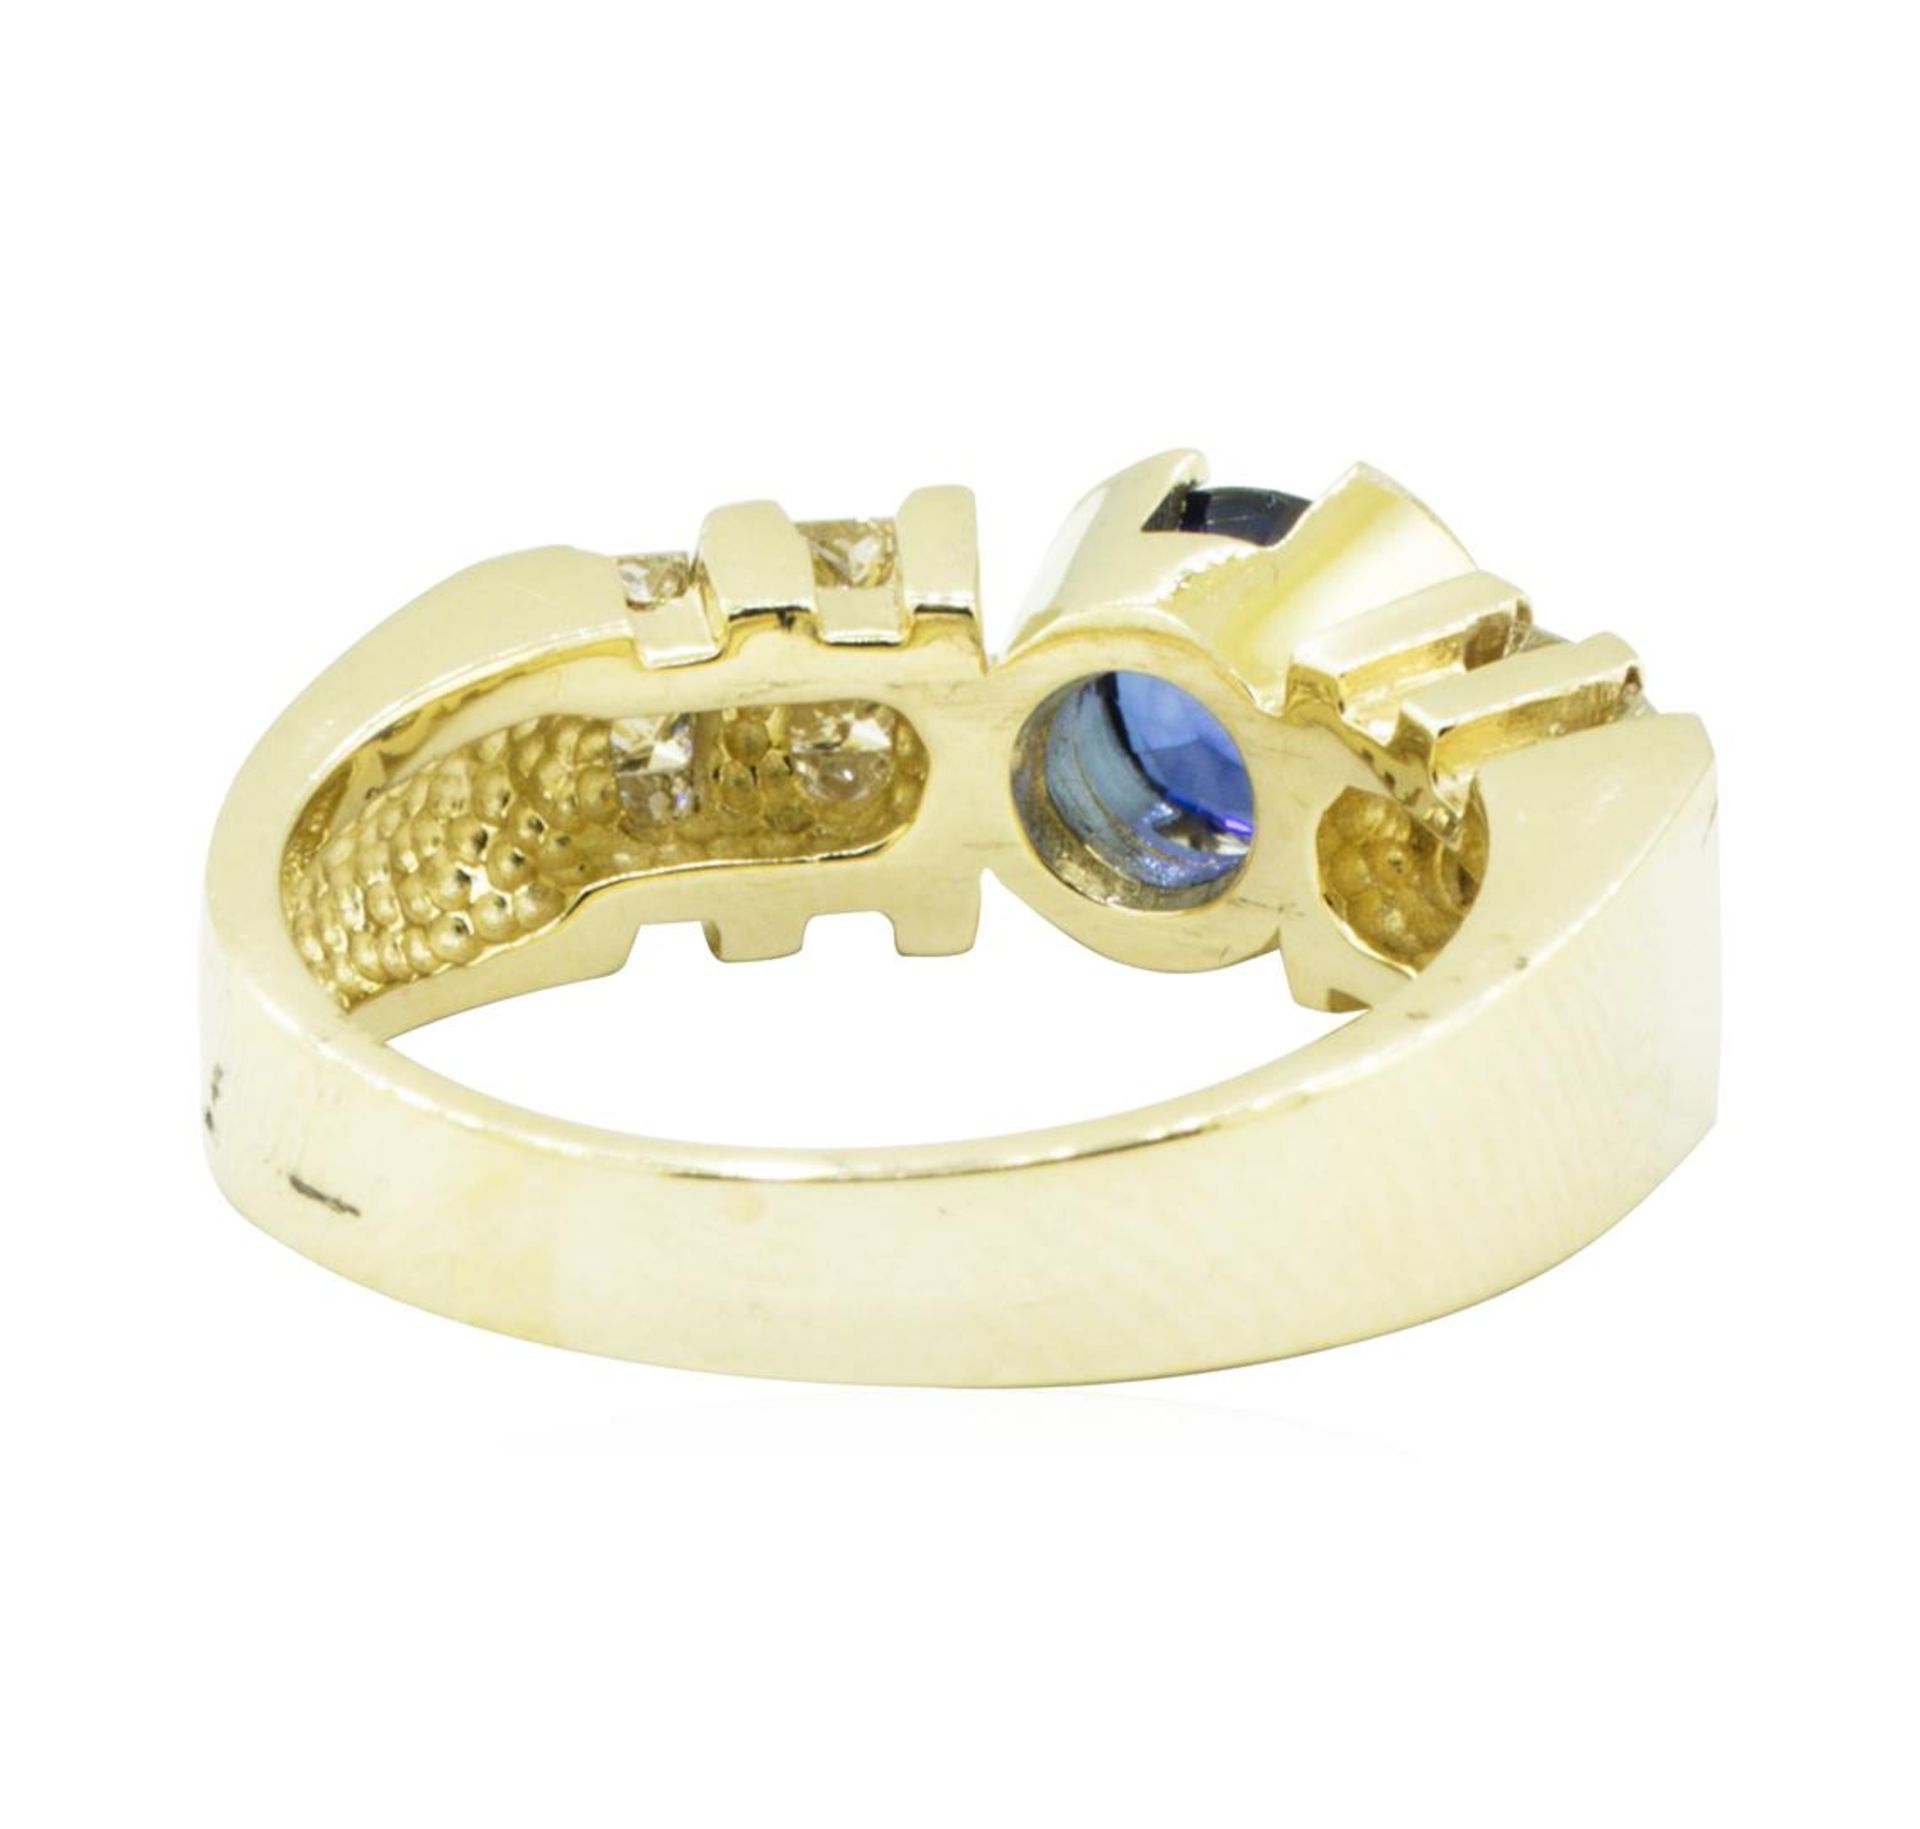 1.45ctw Blue Sapphire and Diamond Ring - 14KT Yellow Gold - Image 3 of 4